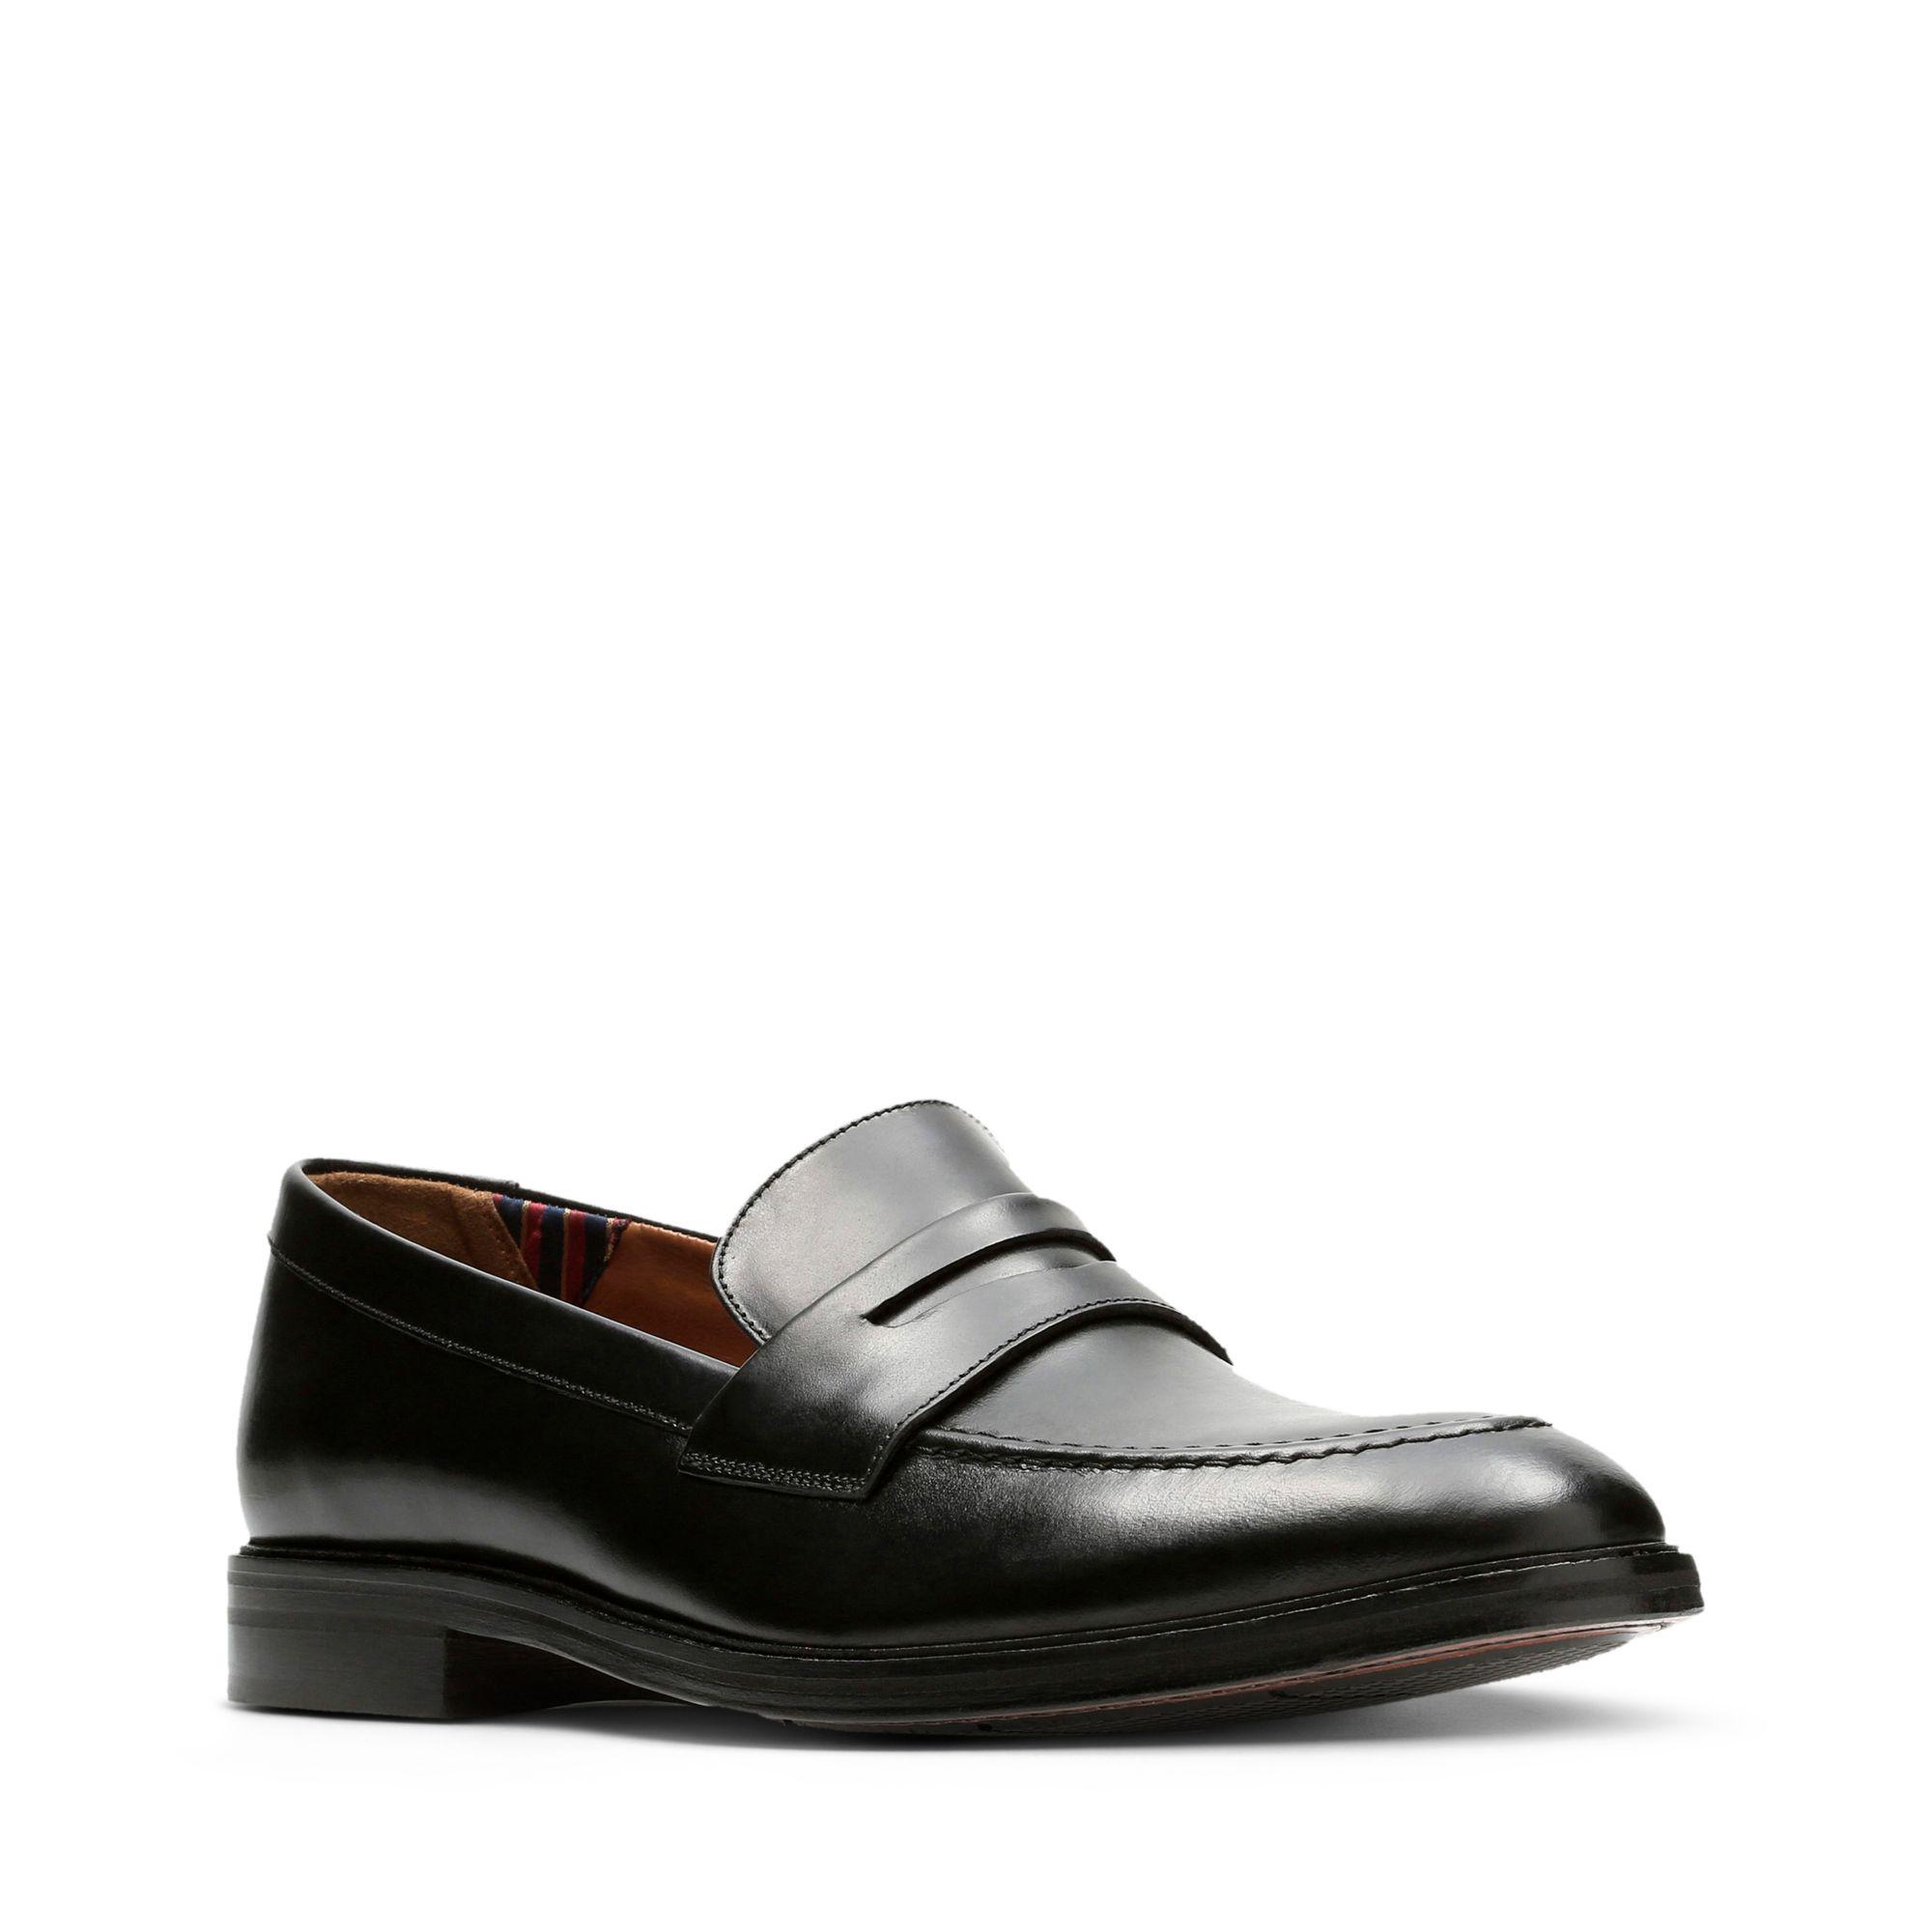 Clarks Leather Mckewen Step in Black 